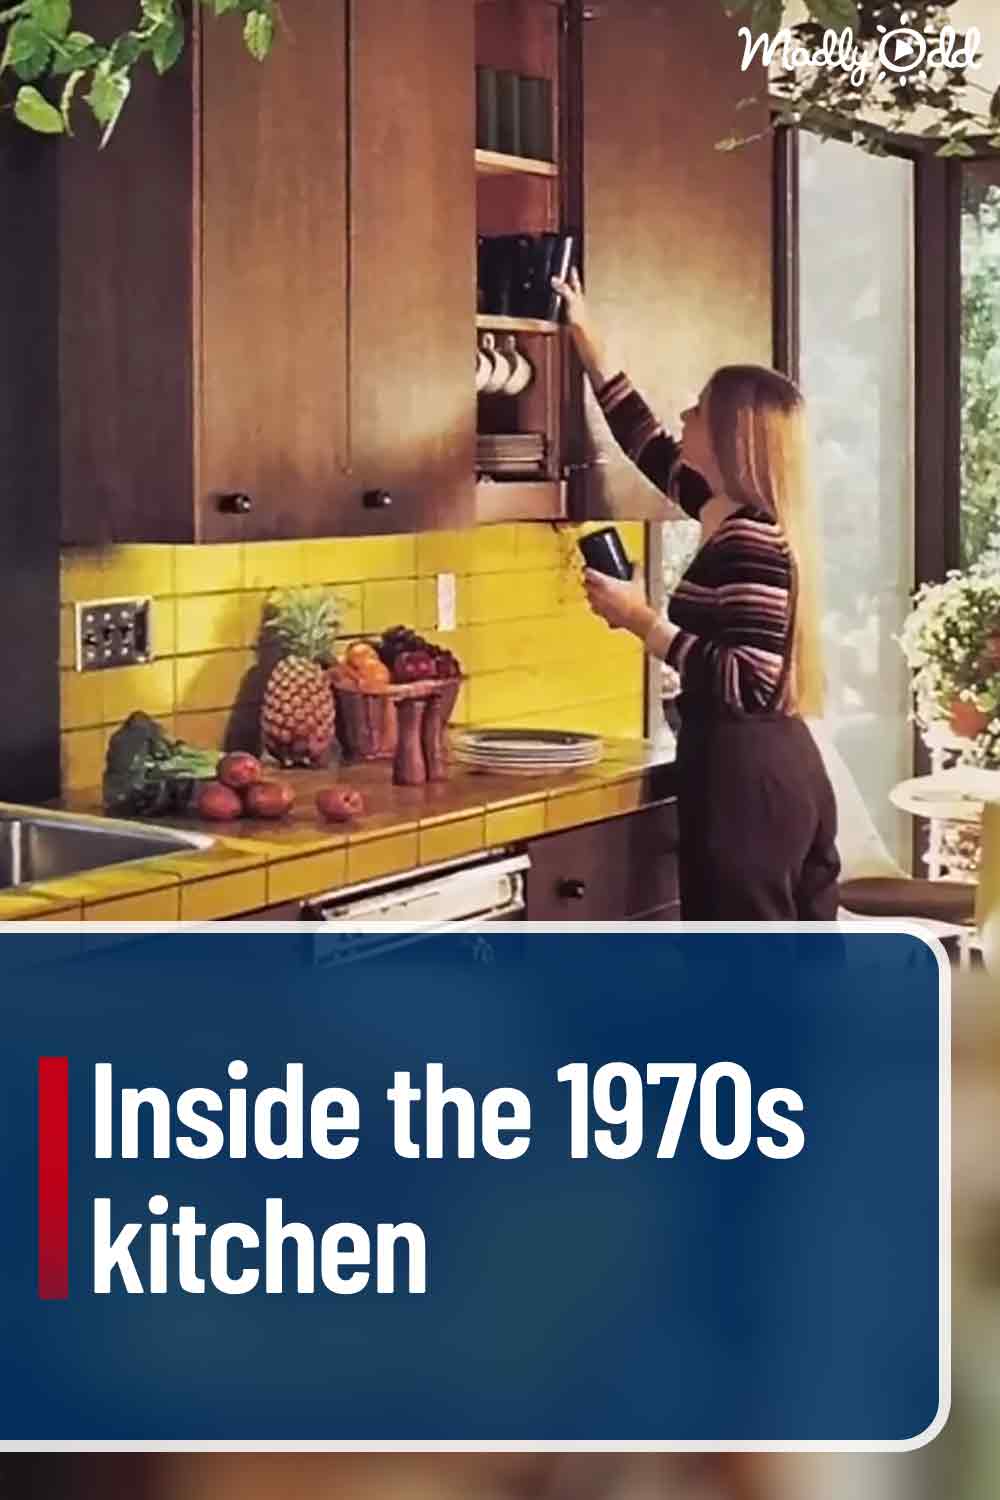 Inside the 1970s kitchen